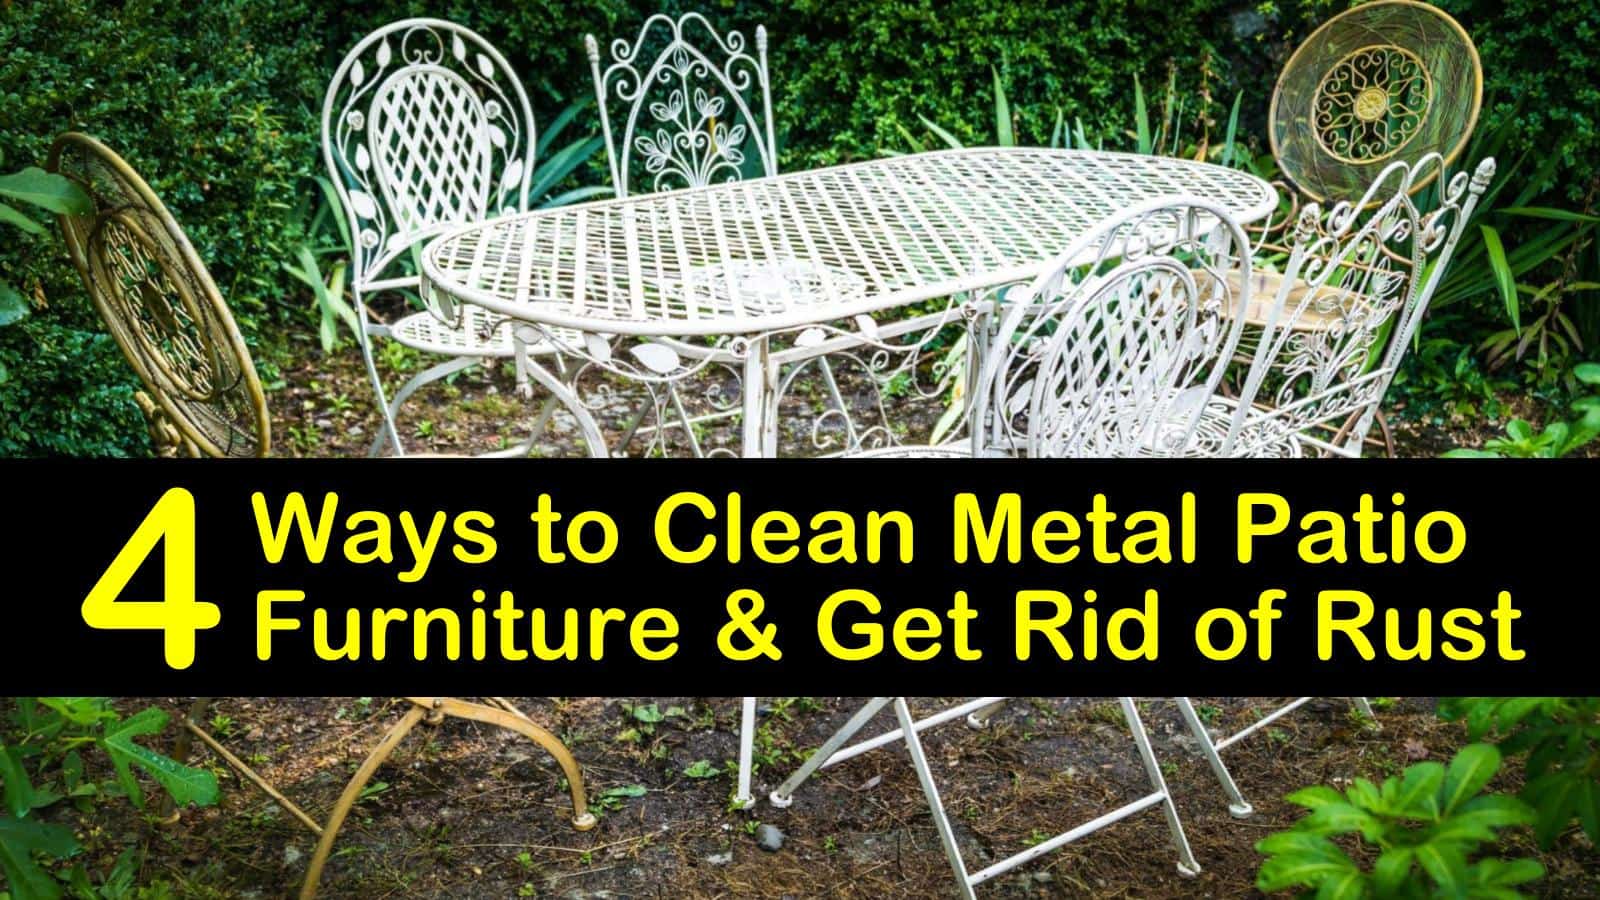 4 Ways To Clean Metal Patio Furniture, How To Care For Wrought Iron Outdoor Furniture